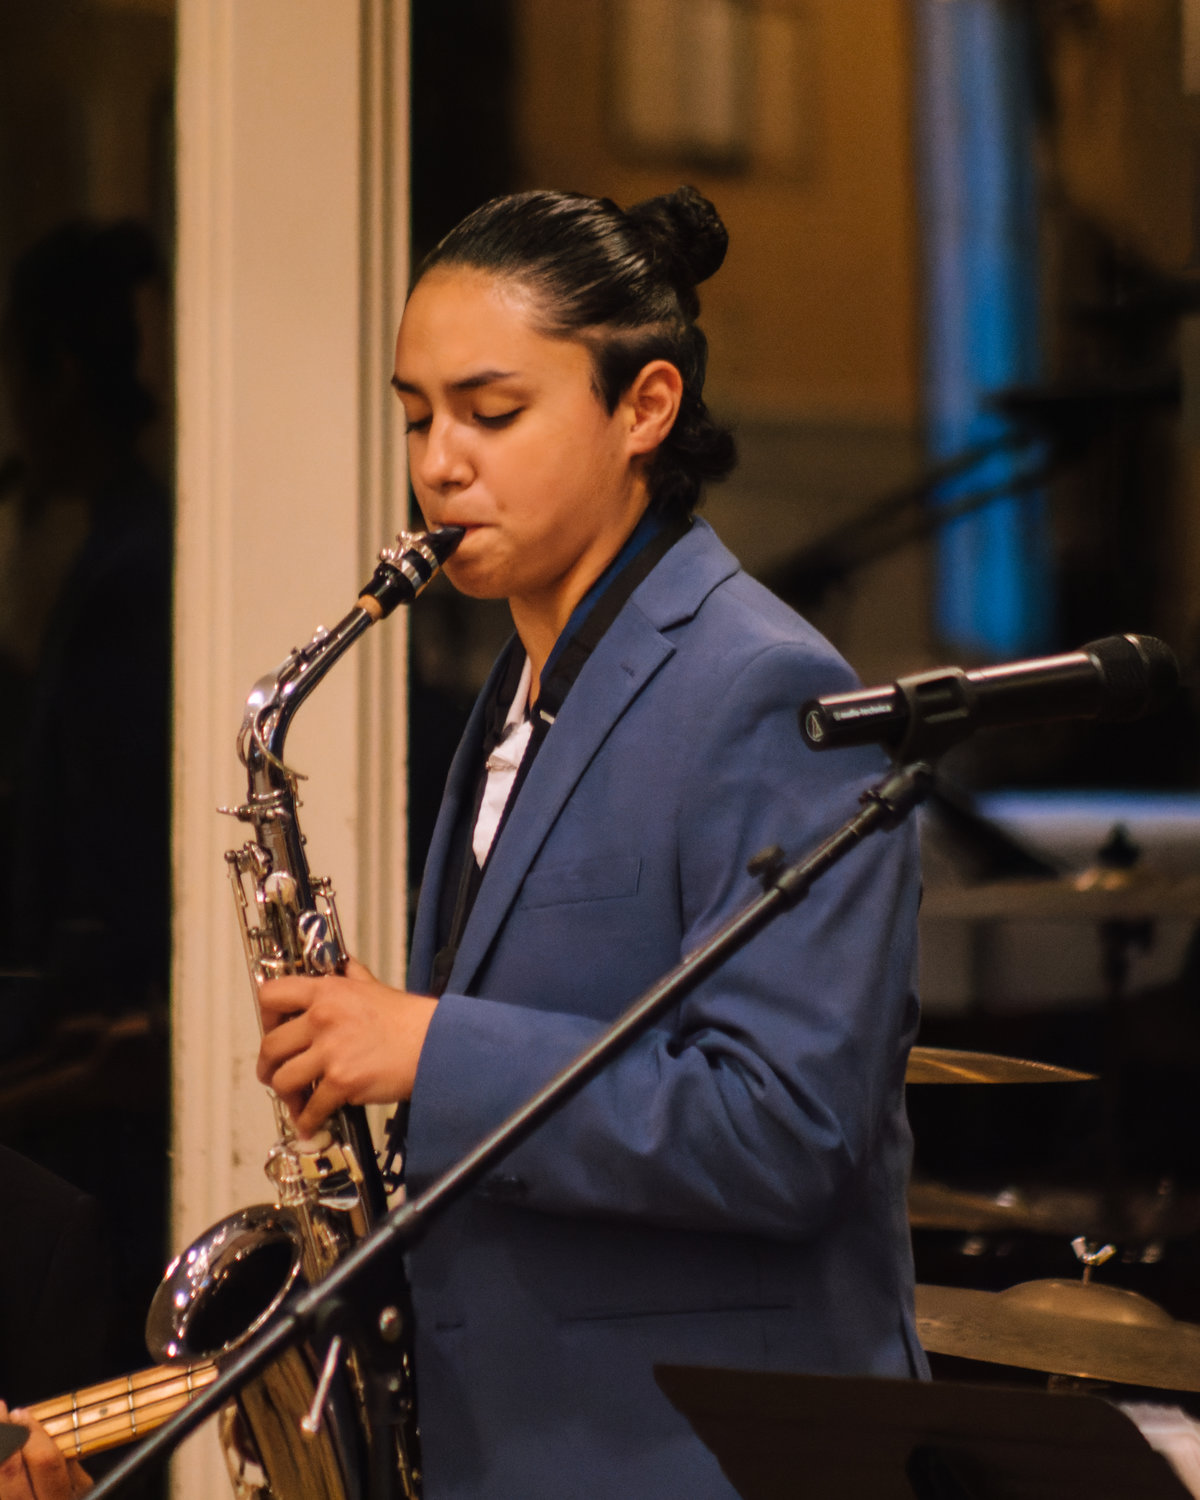 A saxophonist performs for the gala.